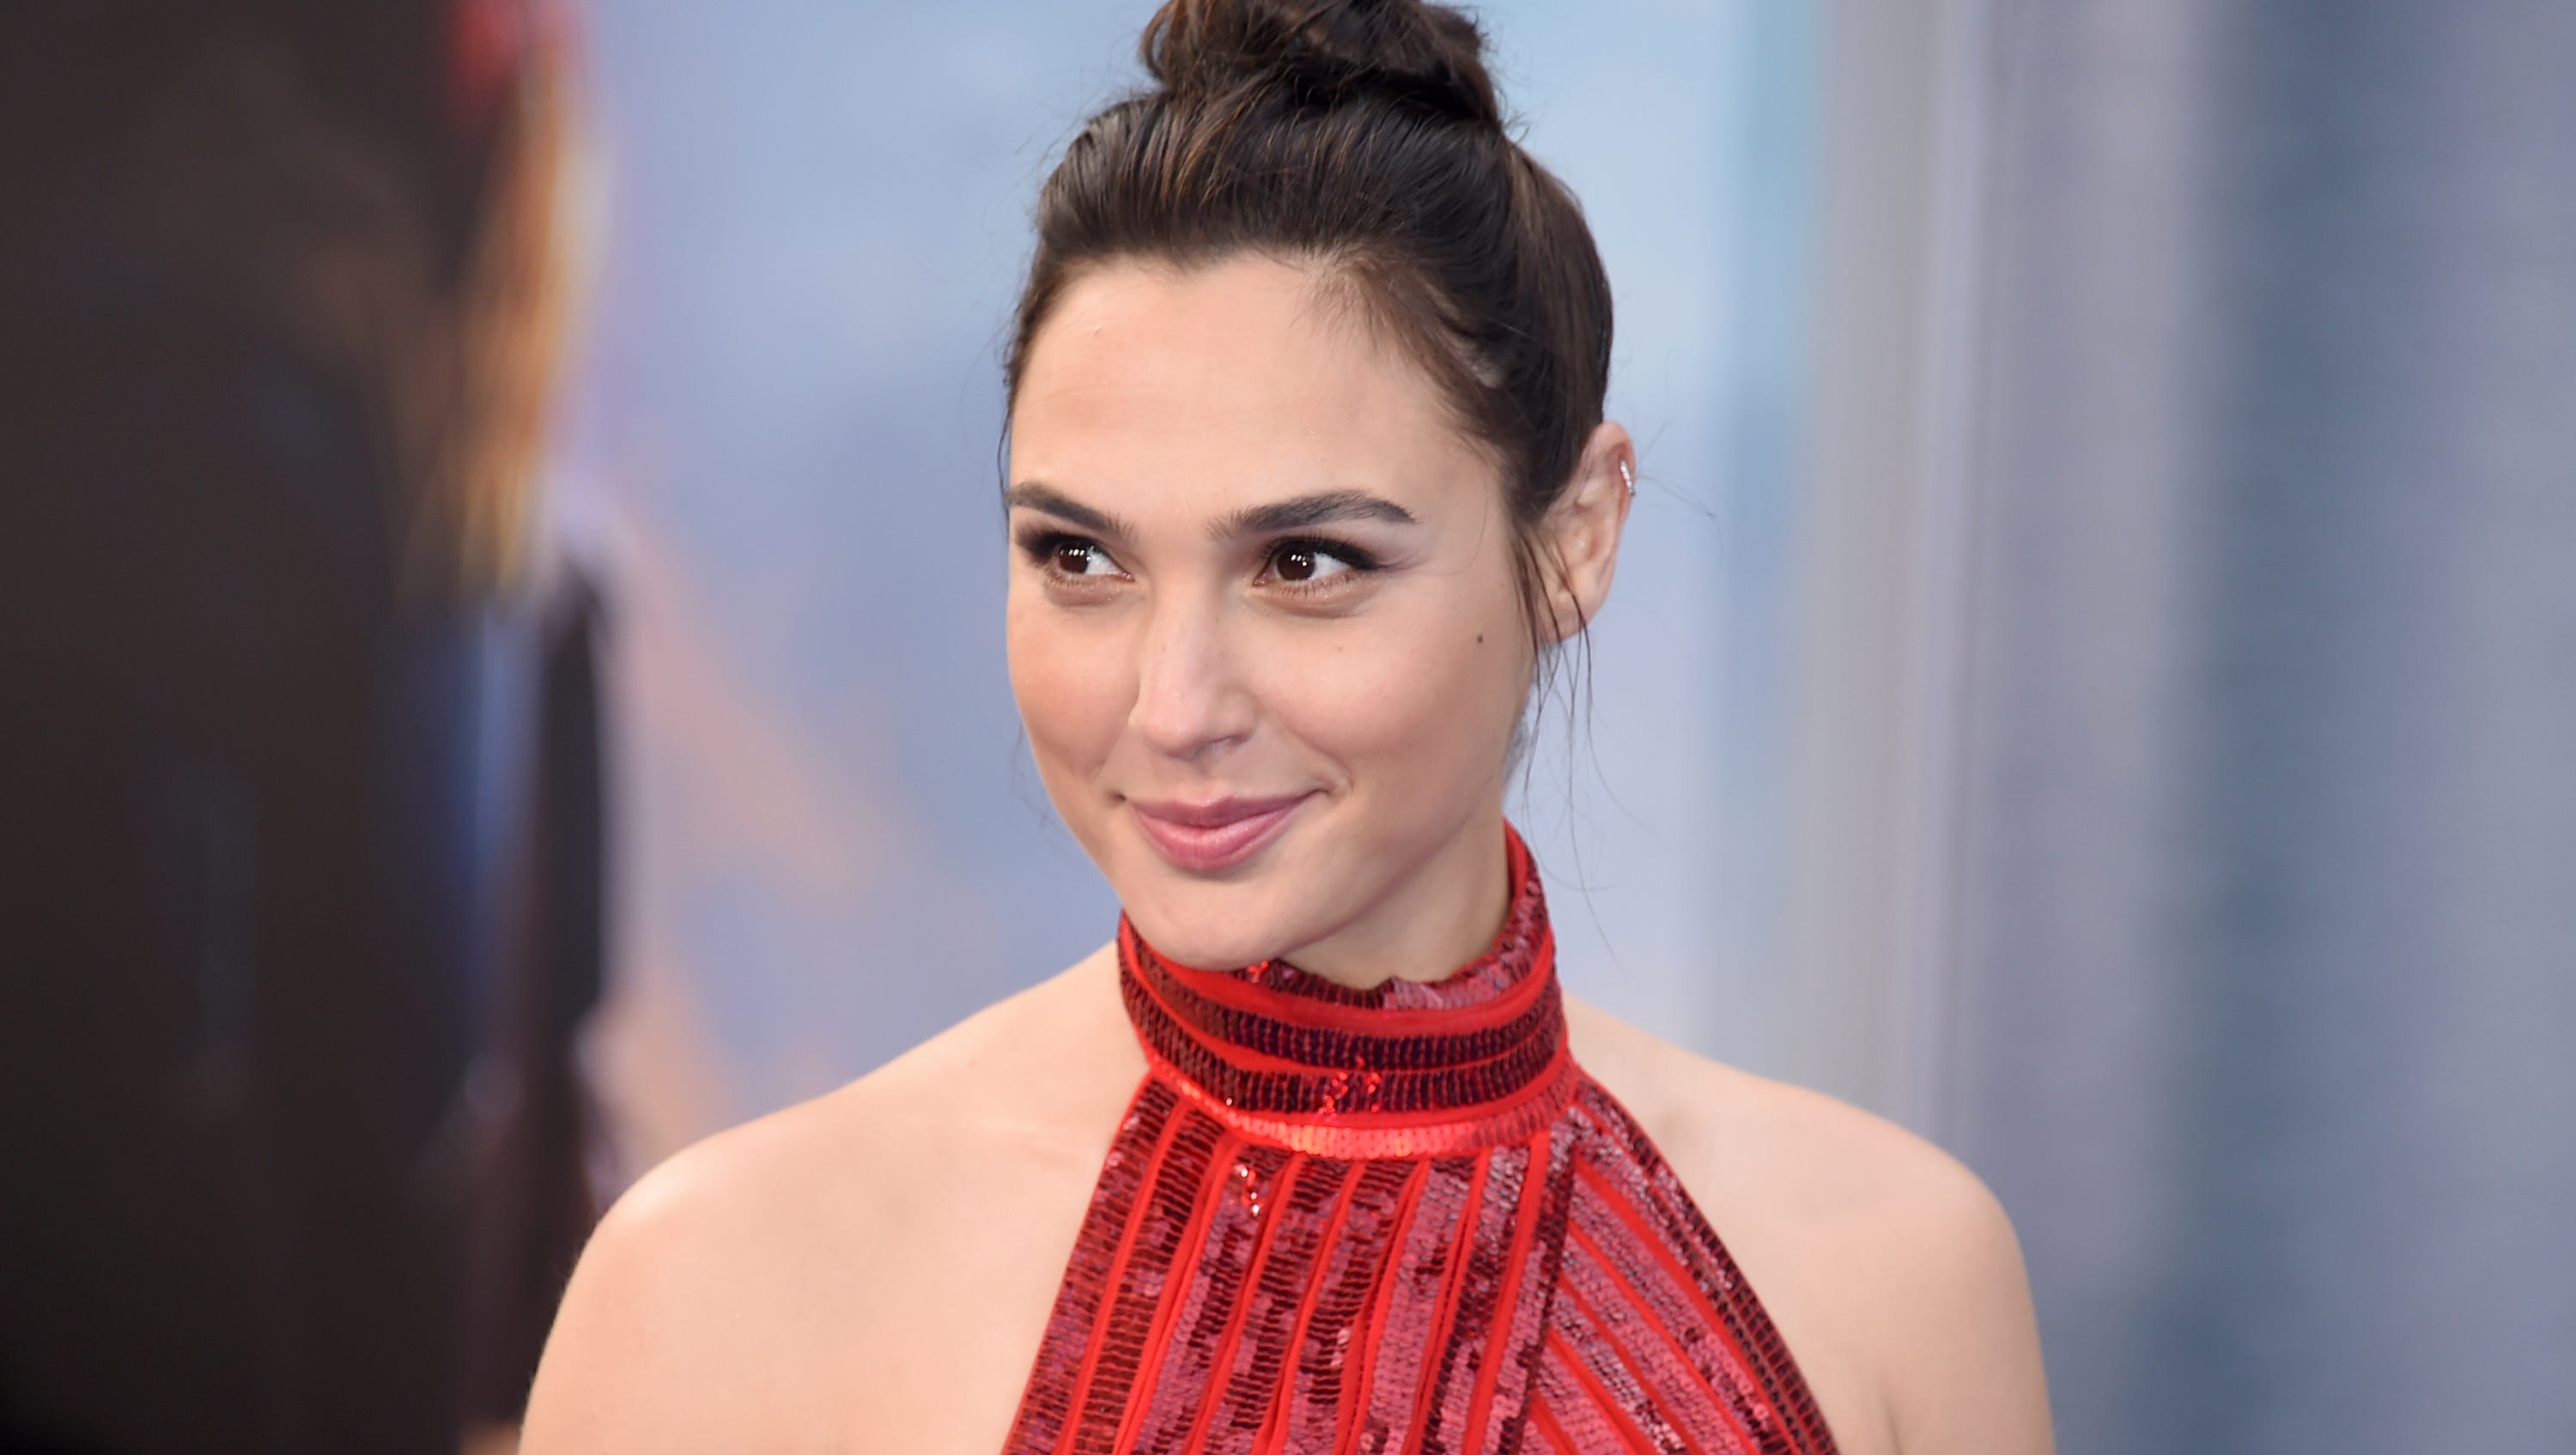 Gal Gadot Trades Wonder Woman Costume For Swimsuit During Girls Trip 10,895,713 likes · 31,722 talking about this. gal gadot trades wonder woman costume